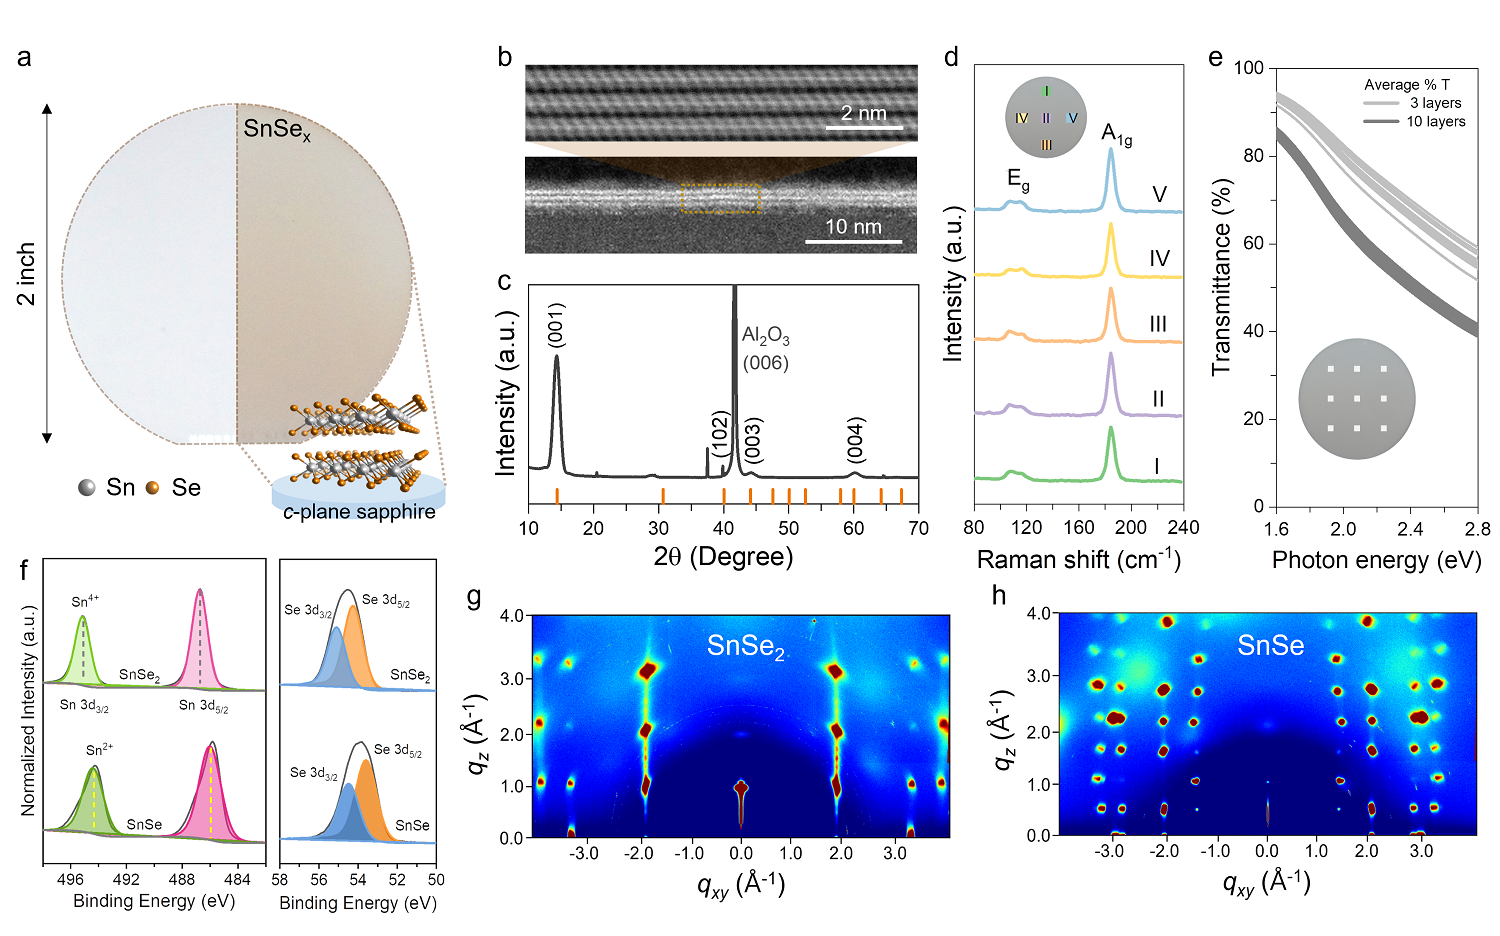 Direct MOCVD growth of wafer-scale 2D SnSe2 films.